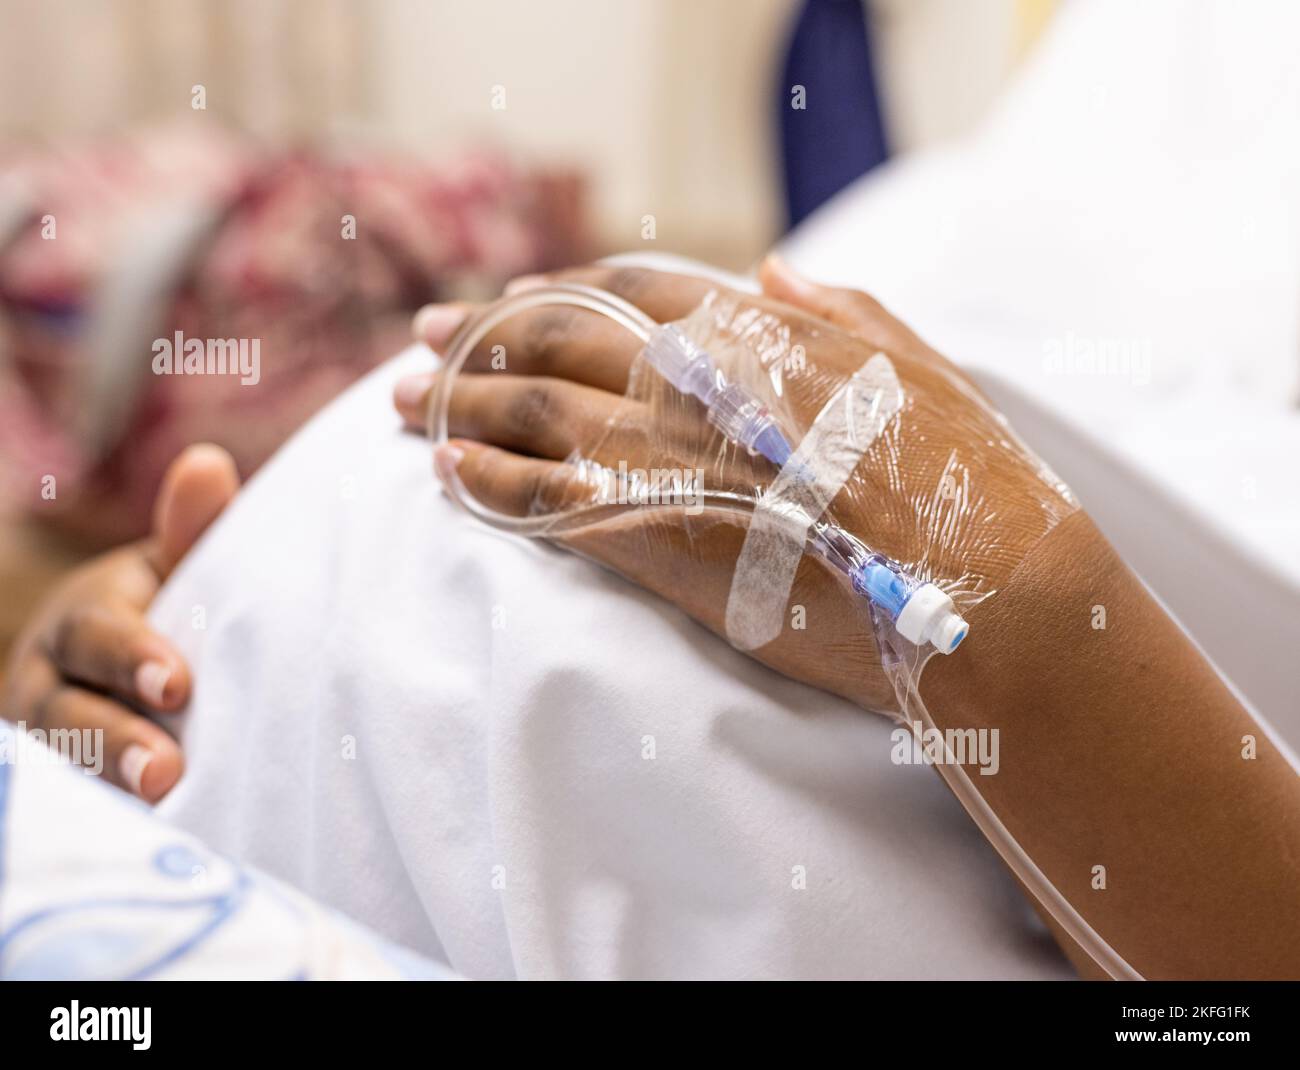 A pregnant woman in labor, lying in a hospital bed waiting for her baby to be born. Stock Photo